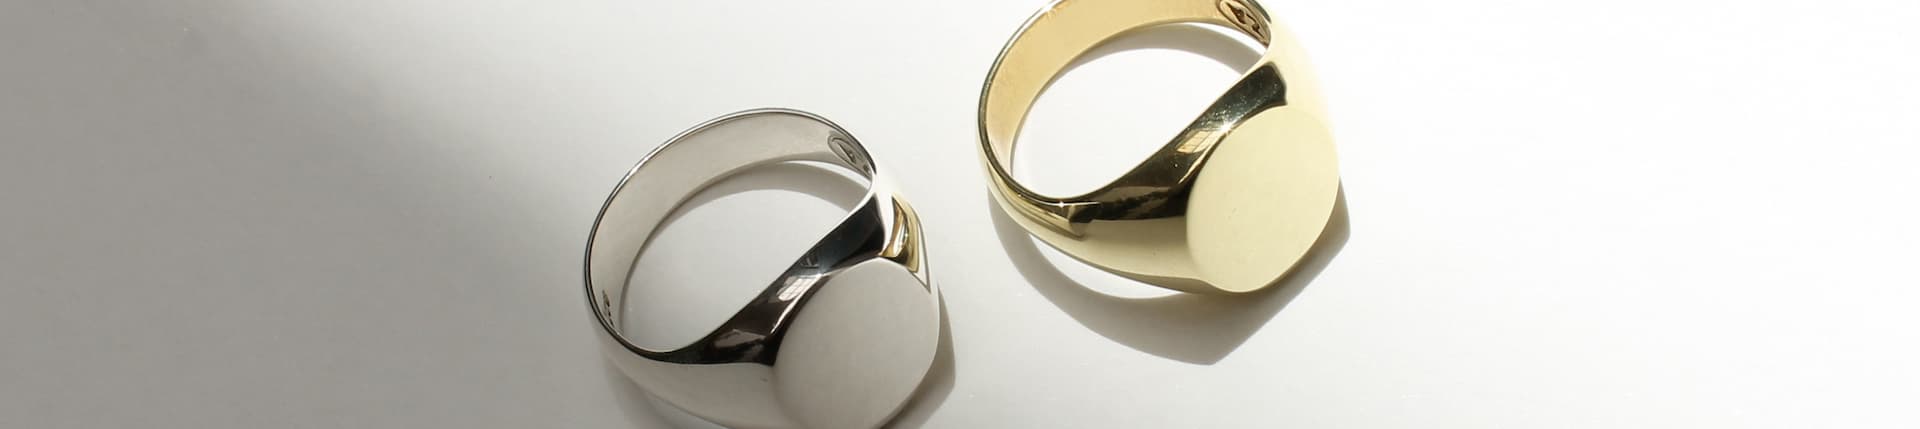 Gold and silver signet rings for men.